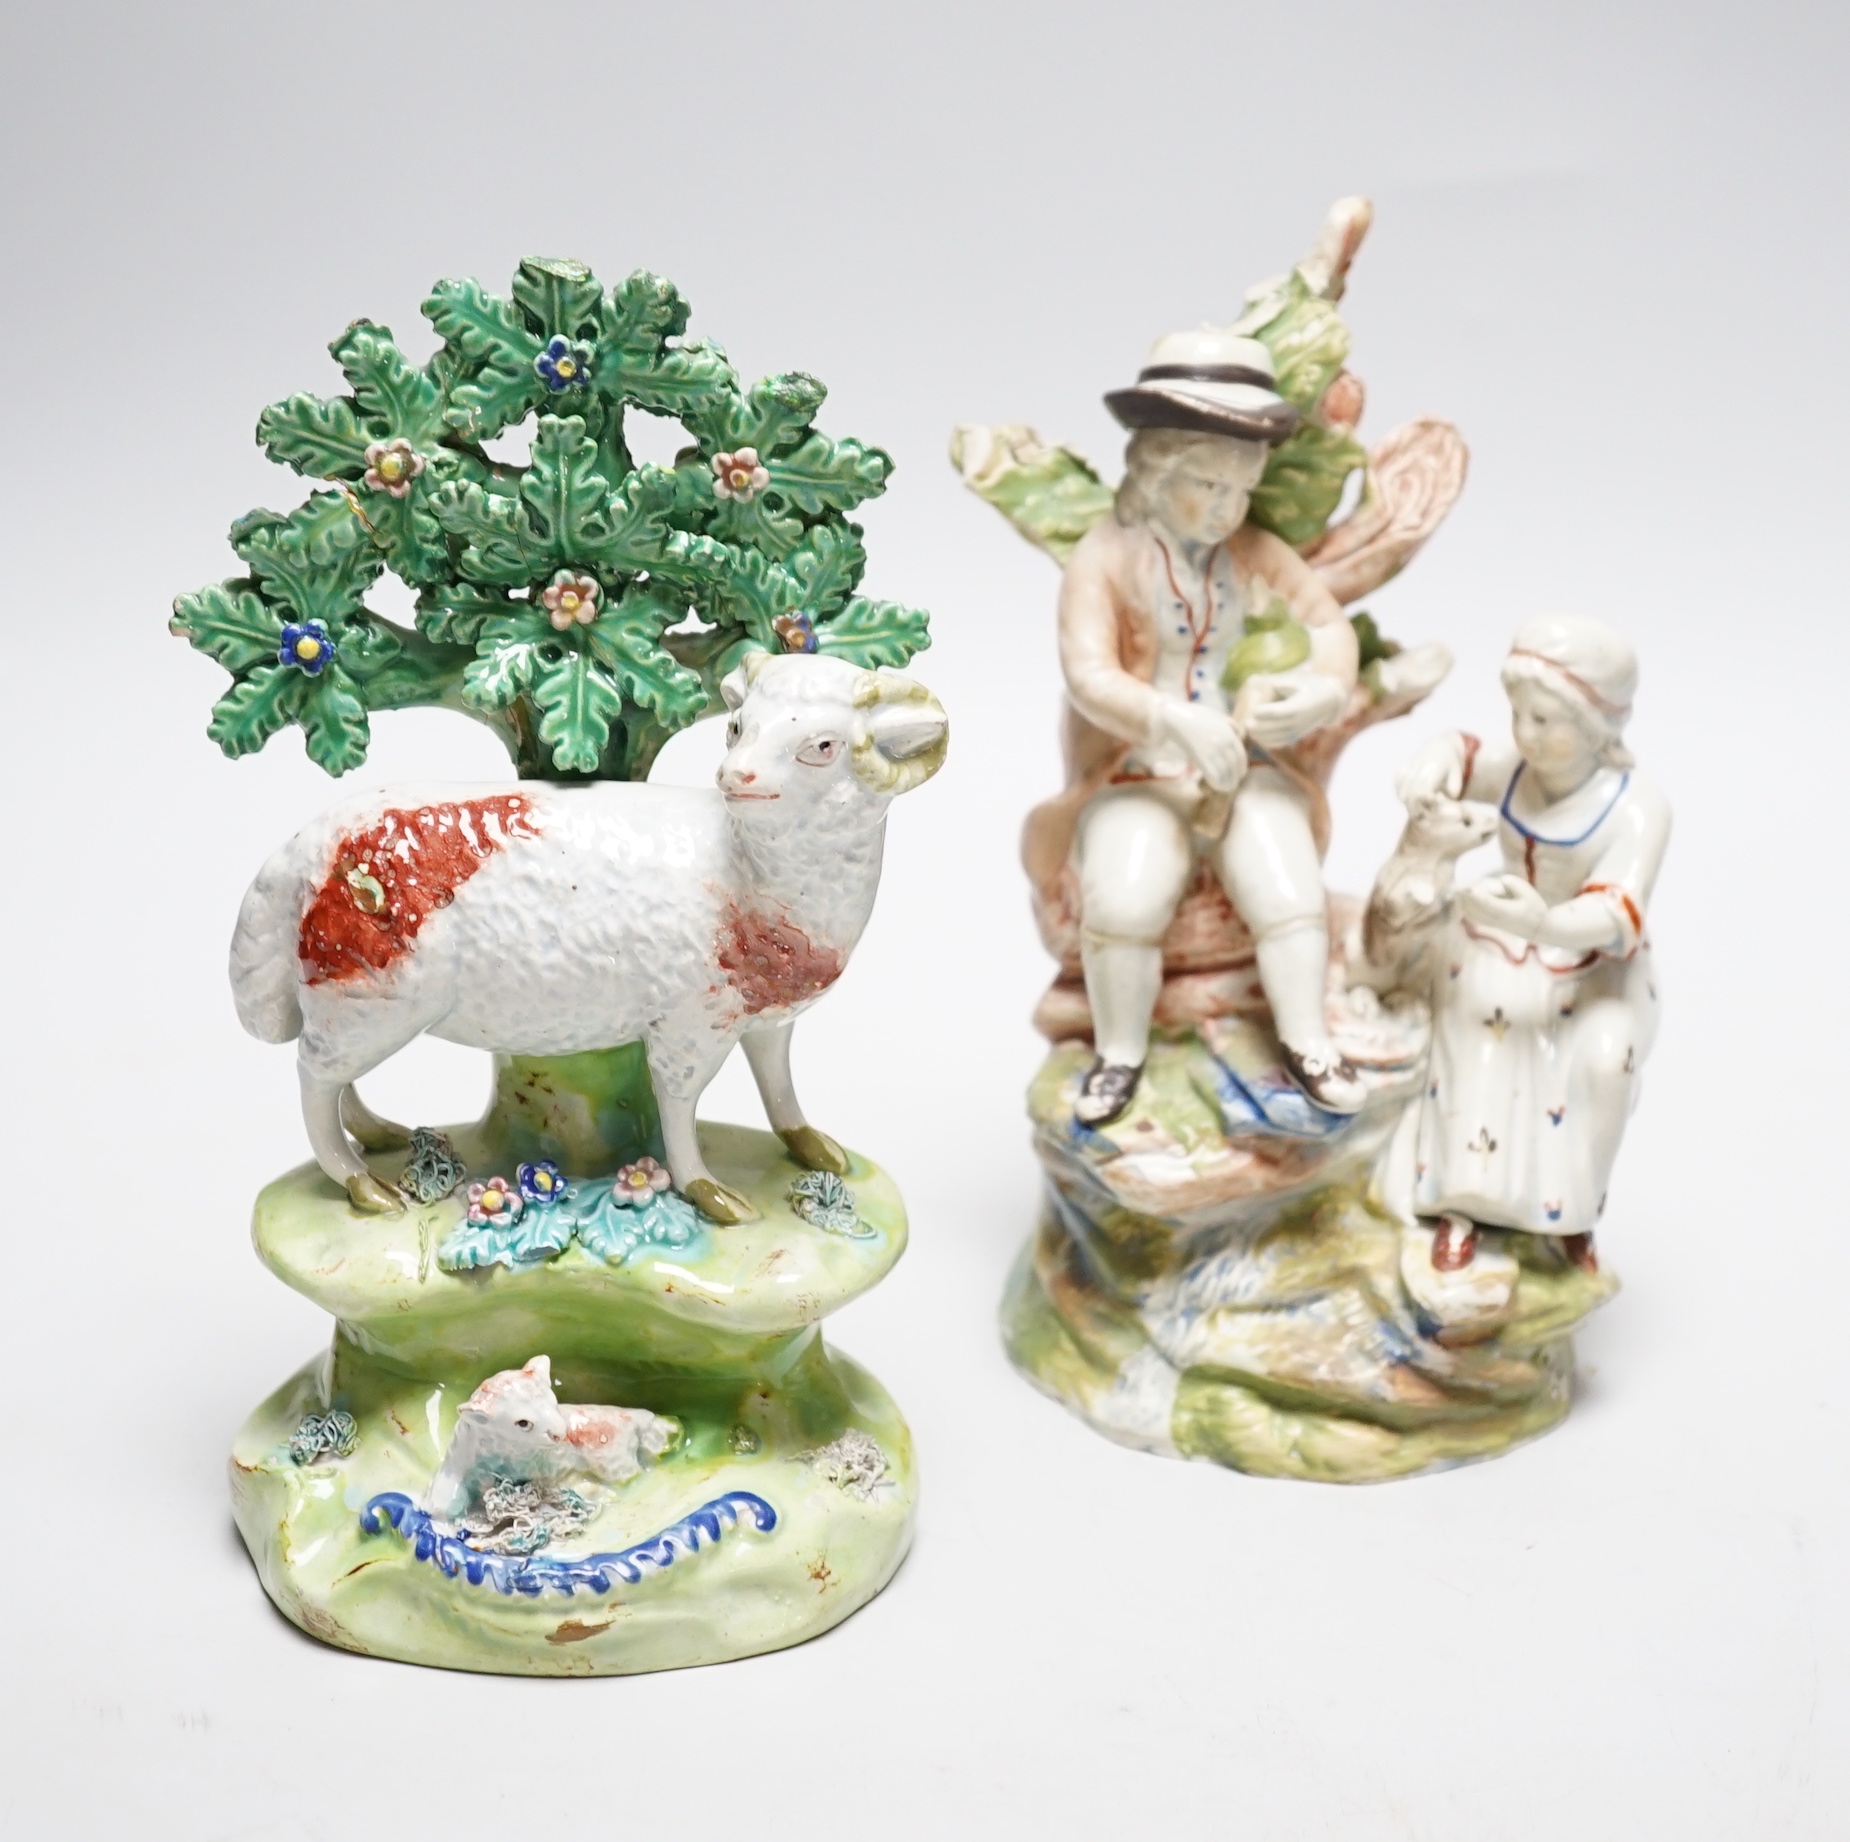 A Walton pearlware figure of a ram, c.1820 and an Enoch Wood type figure group, c. 1800, tallest 19cm